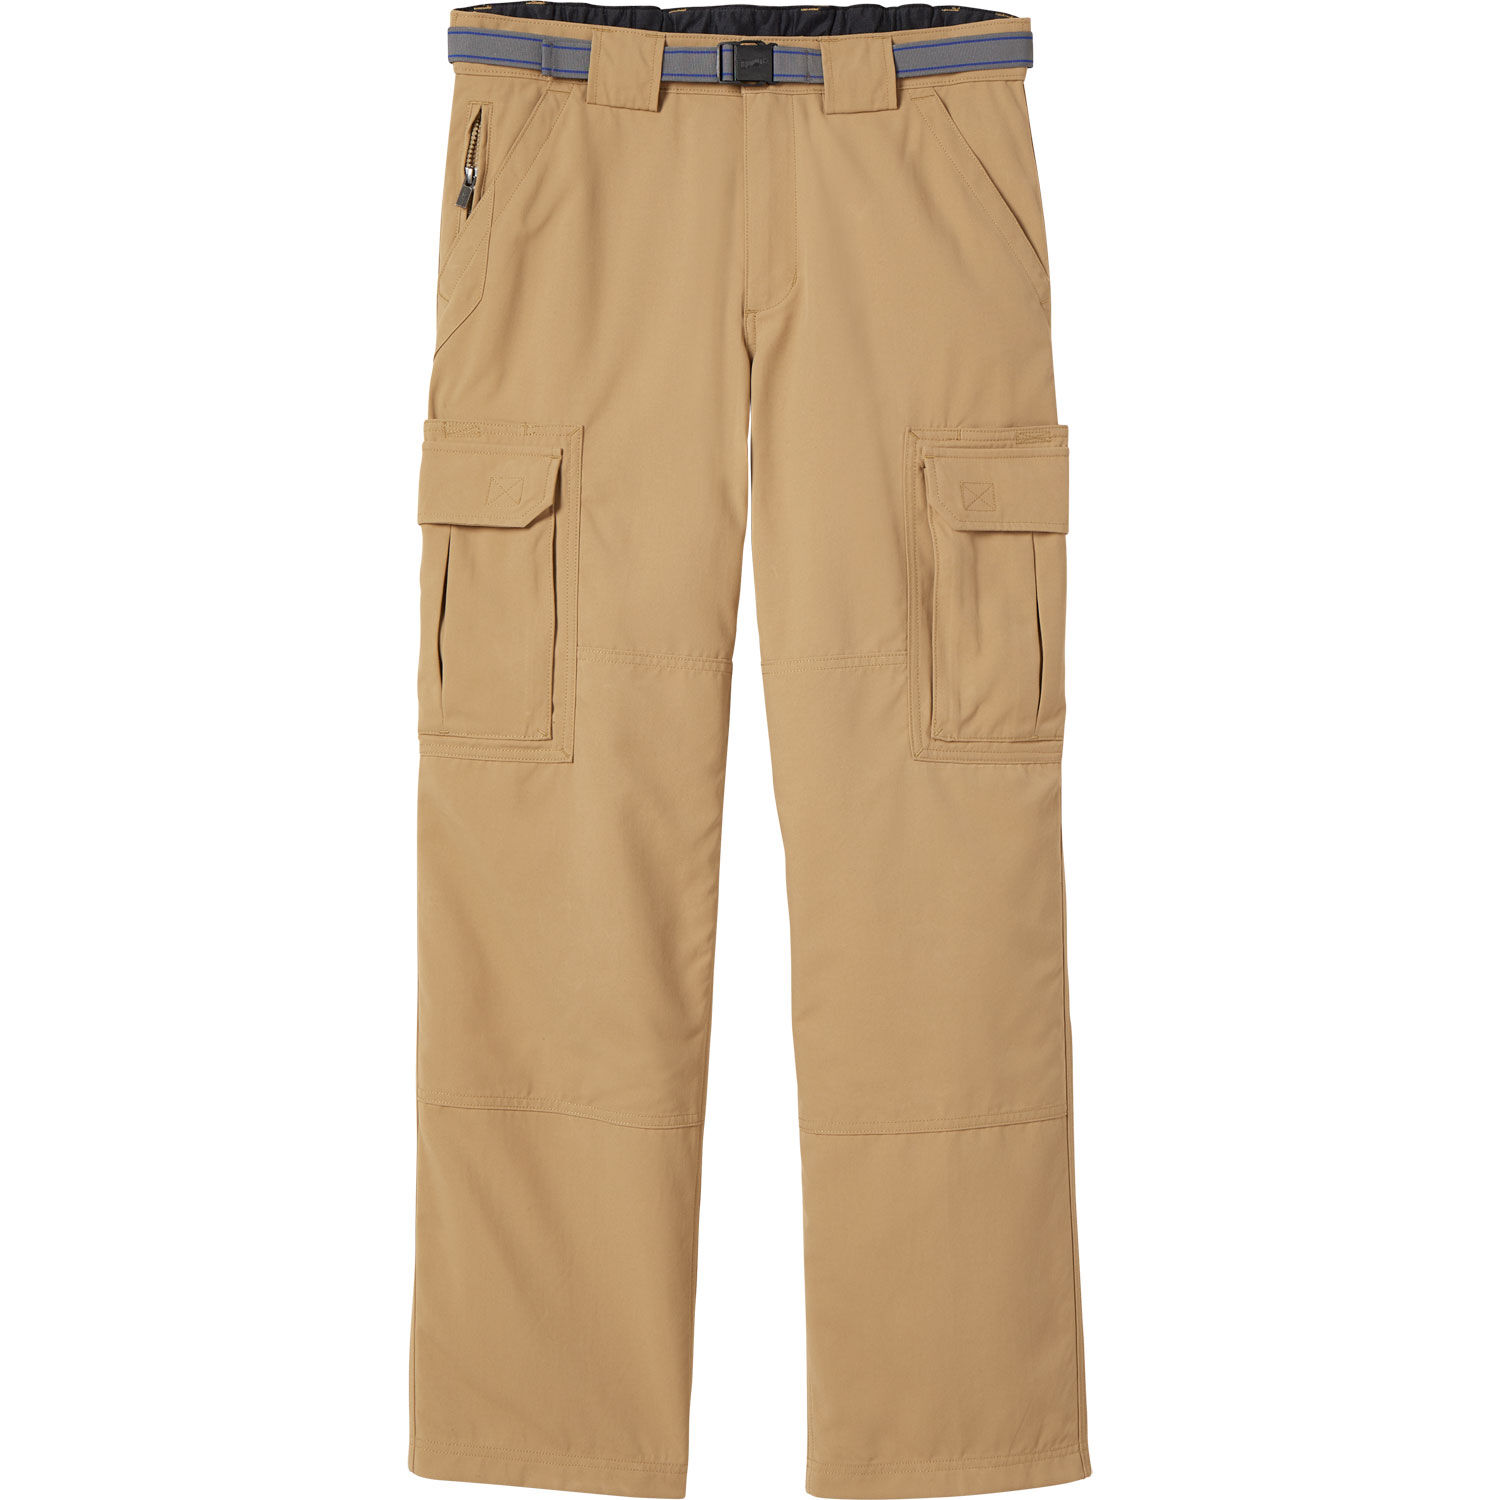 Tan Carhartt Force Ripstop Relaxed Fit Cargo Pants Mens 38 x 32 Many  Pockets | eBay